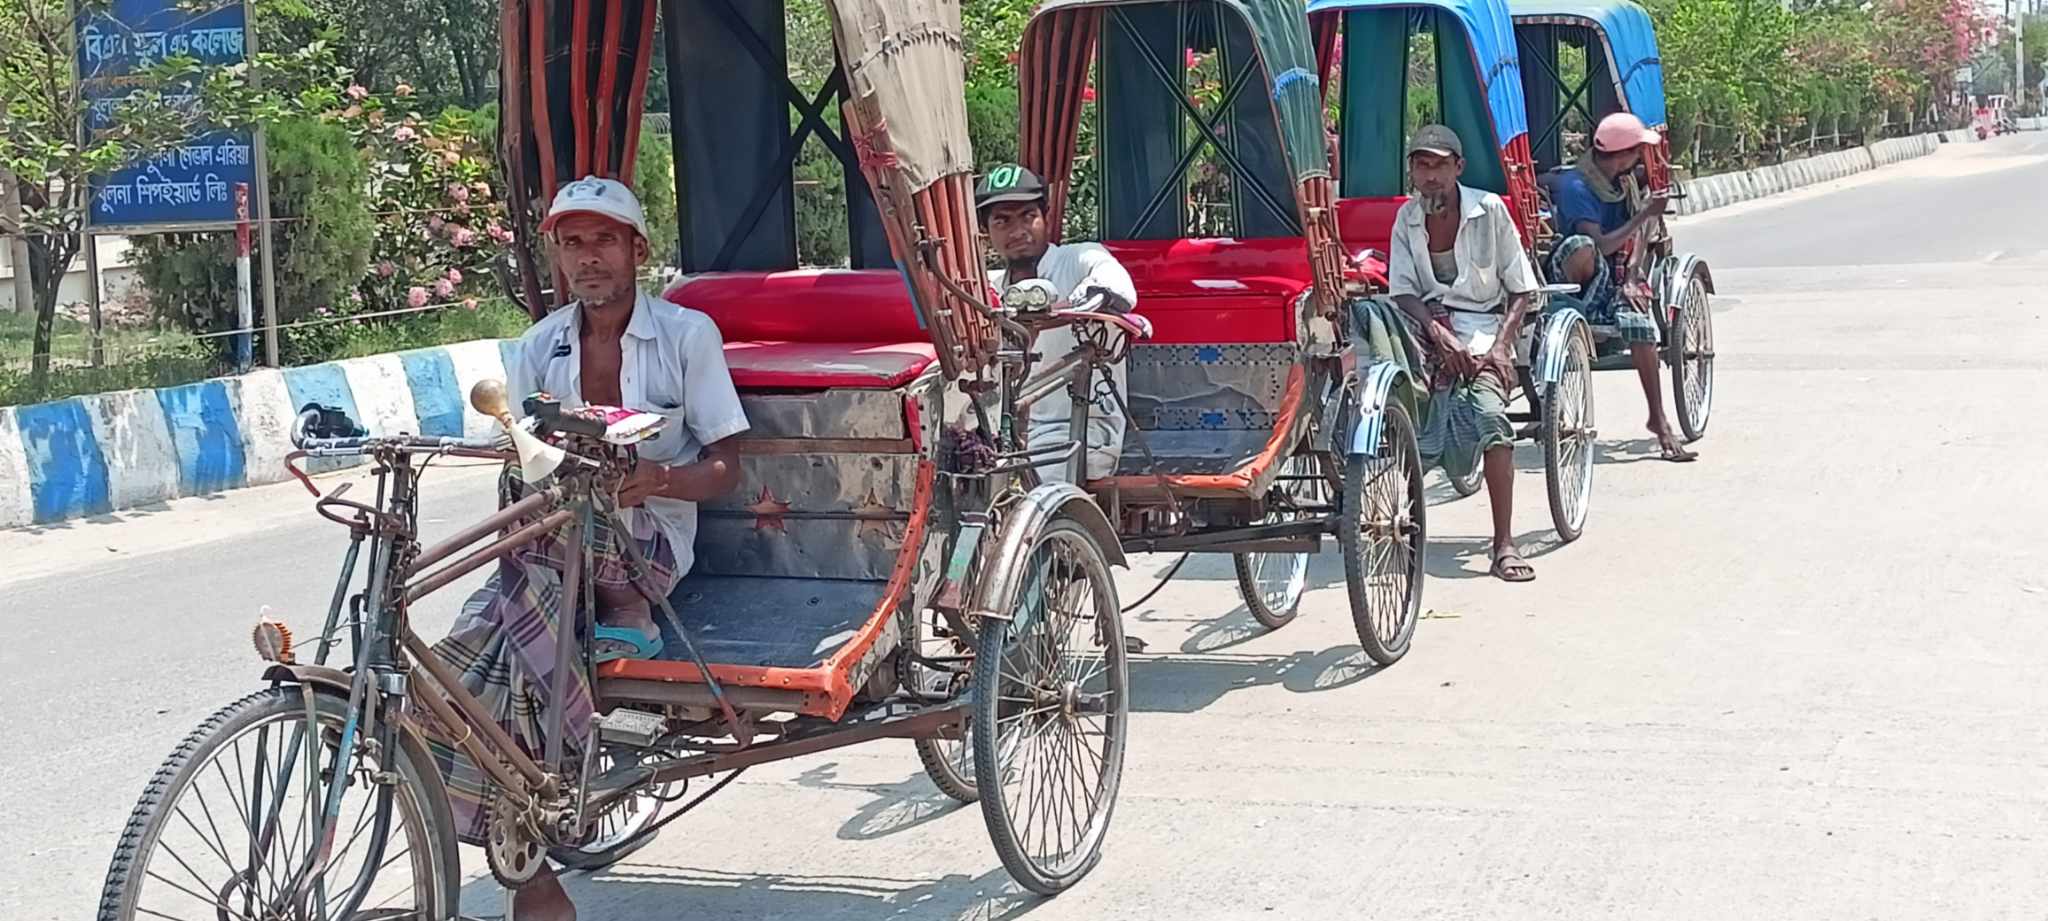 Severe heatwave in Khulna: Day labourers forced to work in dangerous conditions